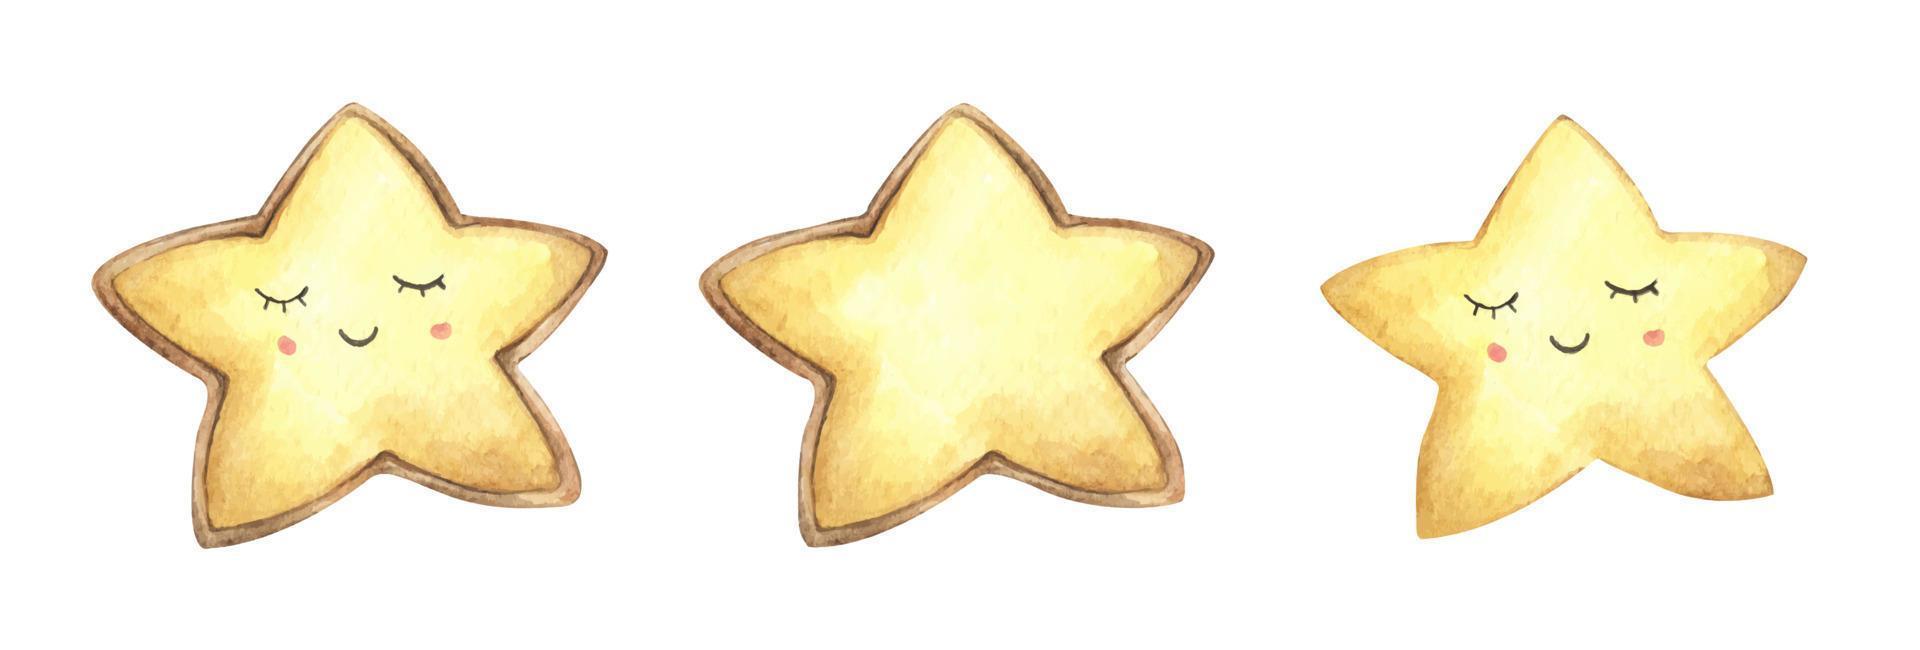 Set of Smile face cookies in the shape of star. Watercolor delicious cookies. Food illustration. vector